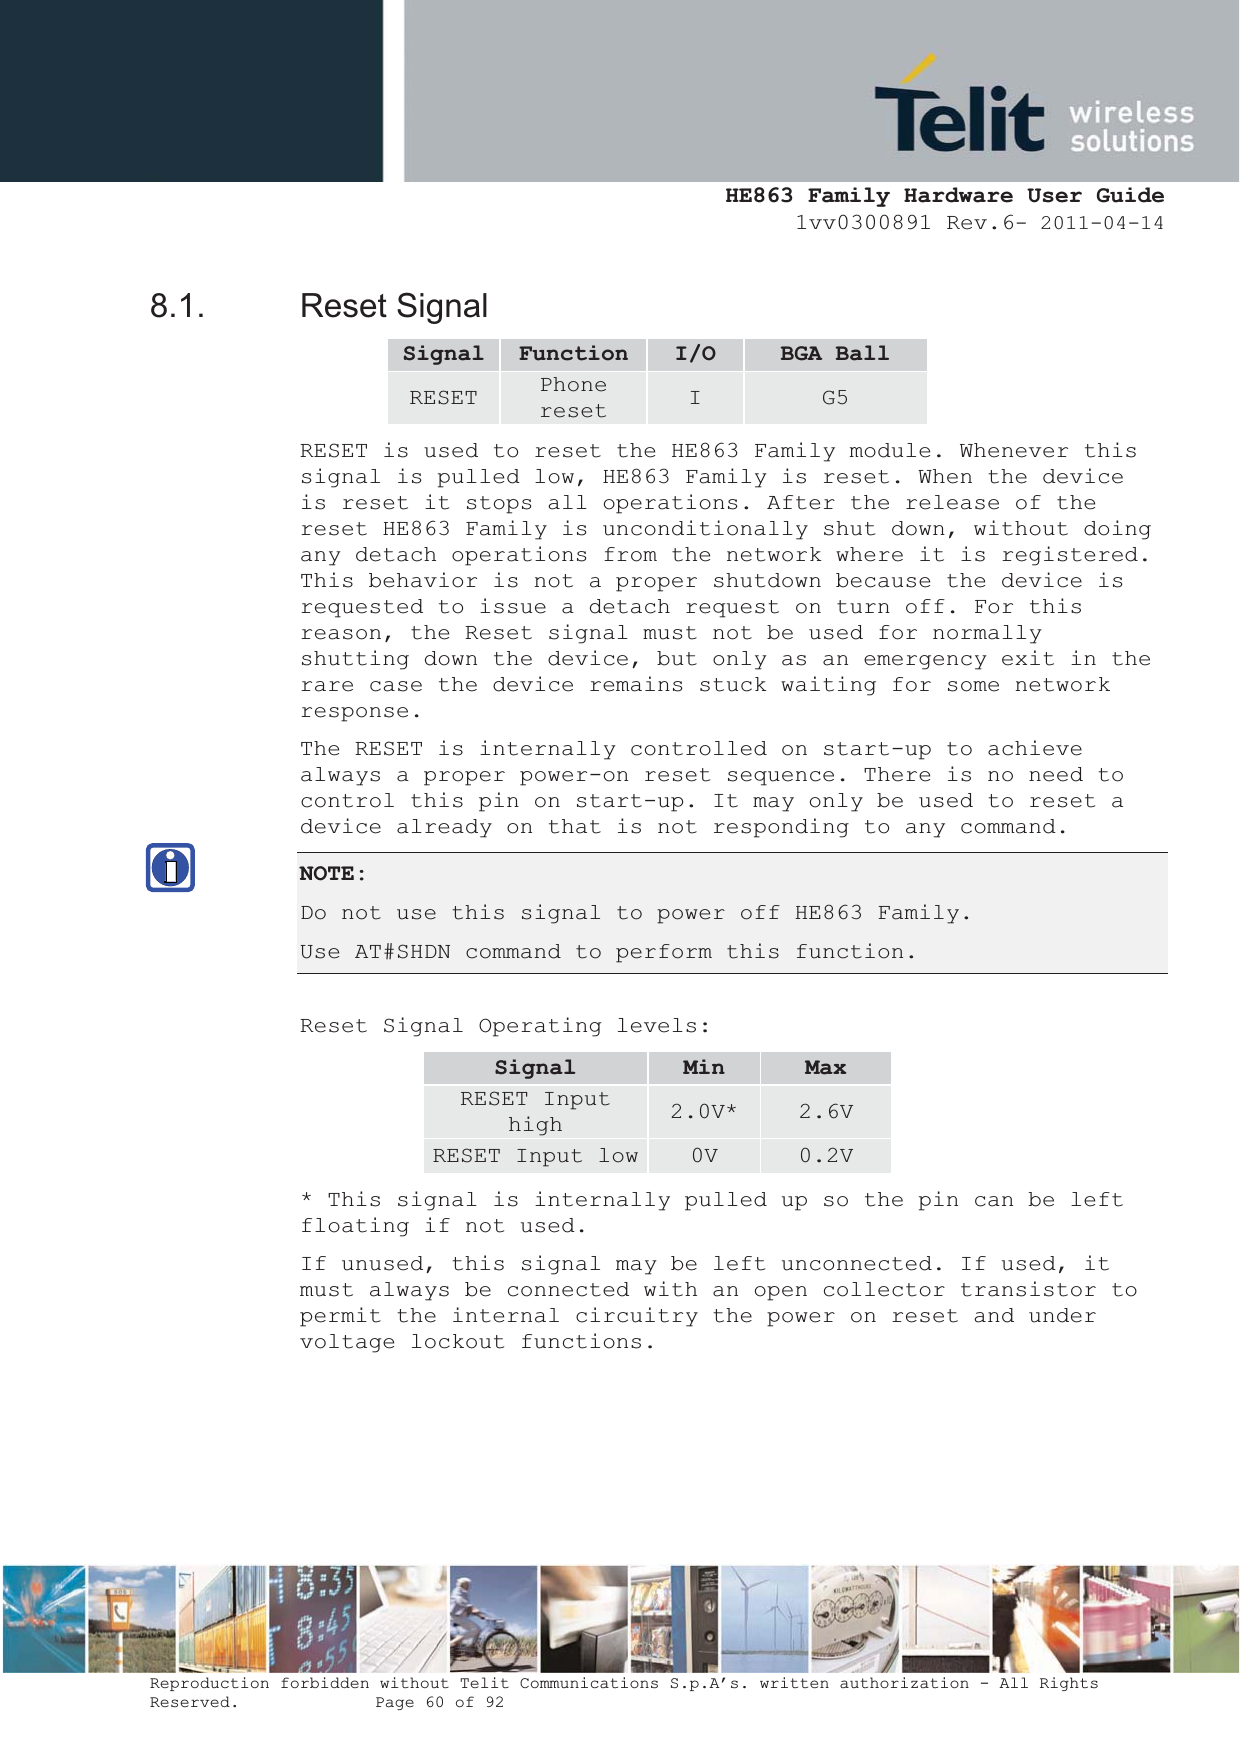  HE863 Family Hardware User Guide 1vv0300891 Rev.6- 2011-04-14    Reproduction forbidden without Telit Communications S.p.A’s. written authorization - All Rights Reserved.    Page 60 of 92  8.1. Reset Signal Signal Function I/O BGA Ball RESET  Phone reset  I  G5 RESET is used to reset the HE863 Family module. Whenever this signal is pulled low, HE863 Family is reset. When the device is reset it stops all operations. After the release of the reset HE863 Family is unconditionally shut down, without doing any detach operations from the network where it is registered. This behavior is not a proper shutdown because the device is requested to issue a detach request on turn off. For this reason, the Reset signal must not be used for normally shutting down the device, but only as an emergency exit in the rare case the device remains stuck waiting for some network response. The RESET is internally controlled on start-up to achieve always a proper power-on reset sequence. There is no need to control this pin on start-up. It may only be used to reset a device already on that is not responding to any command. NOTE:Do not use this signal to power off HE863 Family. Use AT#SHDN command to perform this function.  Reset Signal Operating levels: Signal Min MaxRESET Input high  2.0V*  2.6V RESET Input low 0V  0.2V * This signal is internally pulled up so the pin can be left floating if not used. If unused, this signal may be left unconnected. If used, it must always be connected with an open collector transistor to permit the internal circuitry the power on reset and under voltage lockout functions. 